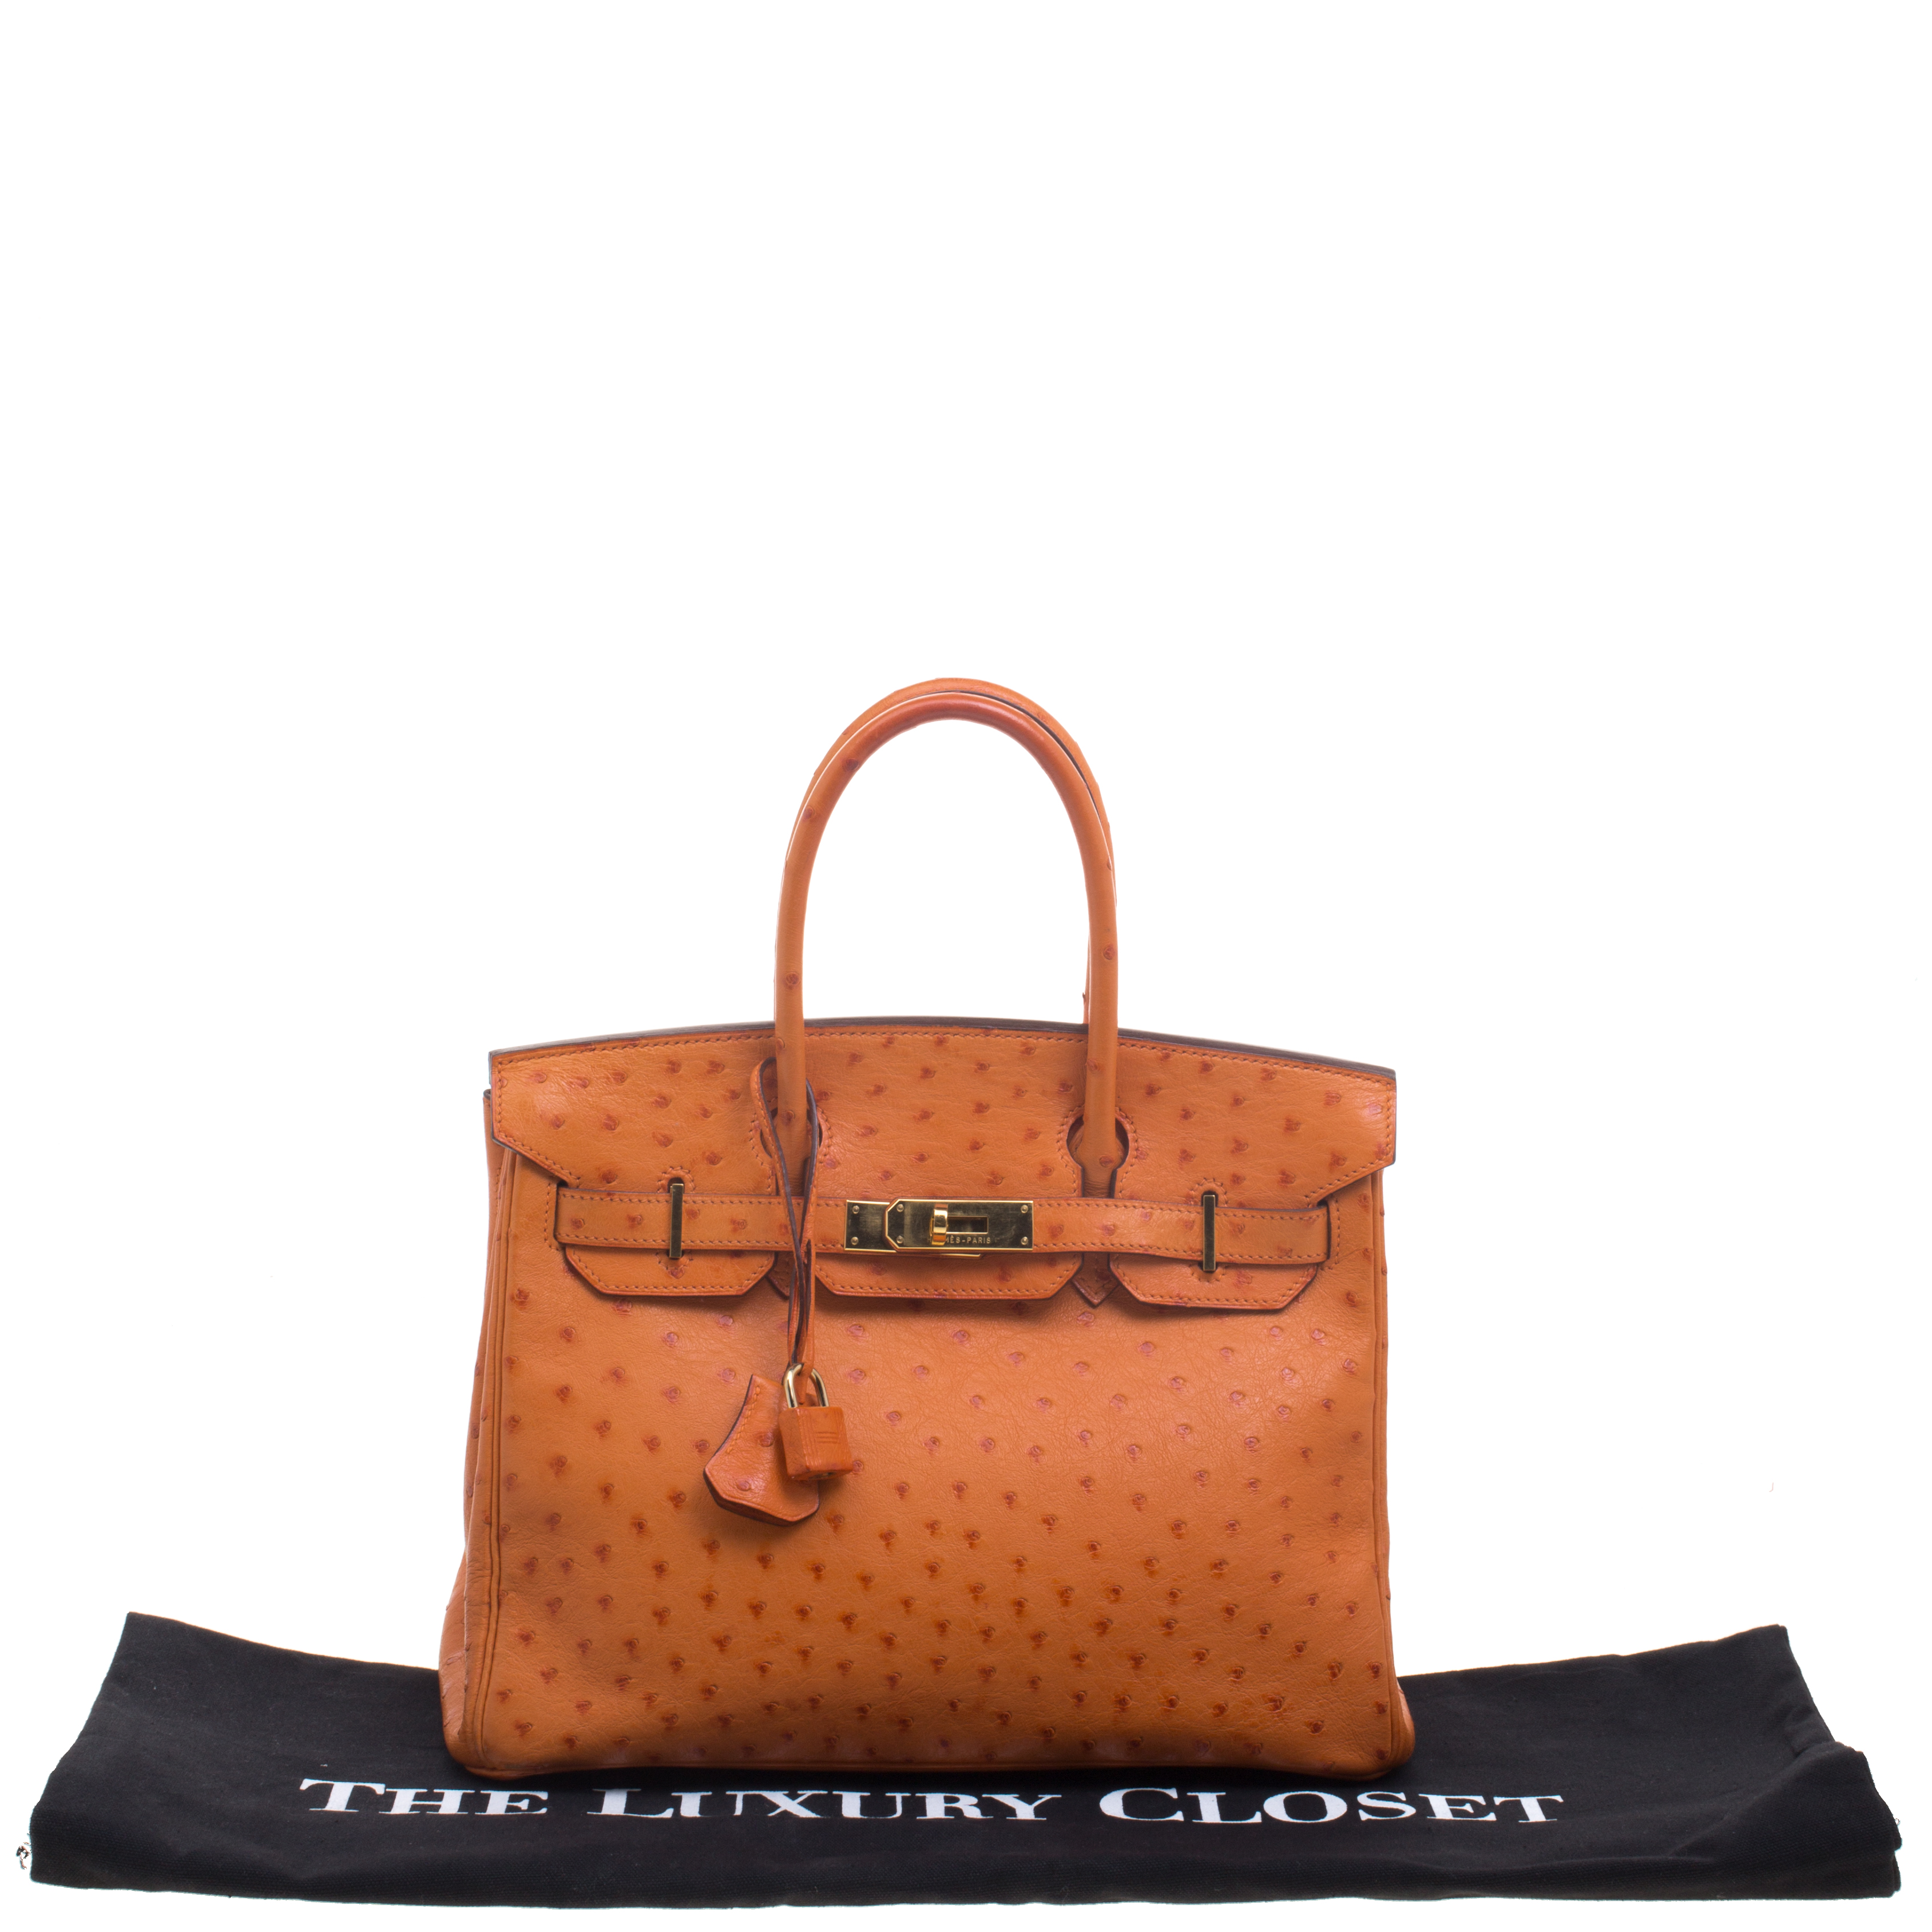 Hermes Birkin 30cm Bag Ostrich Leather Gray W/Gold Hardware $5255 - Nadine  Collections